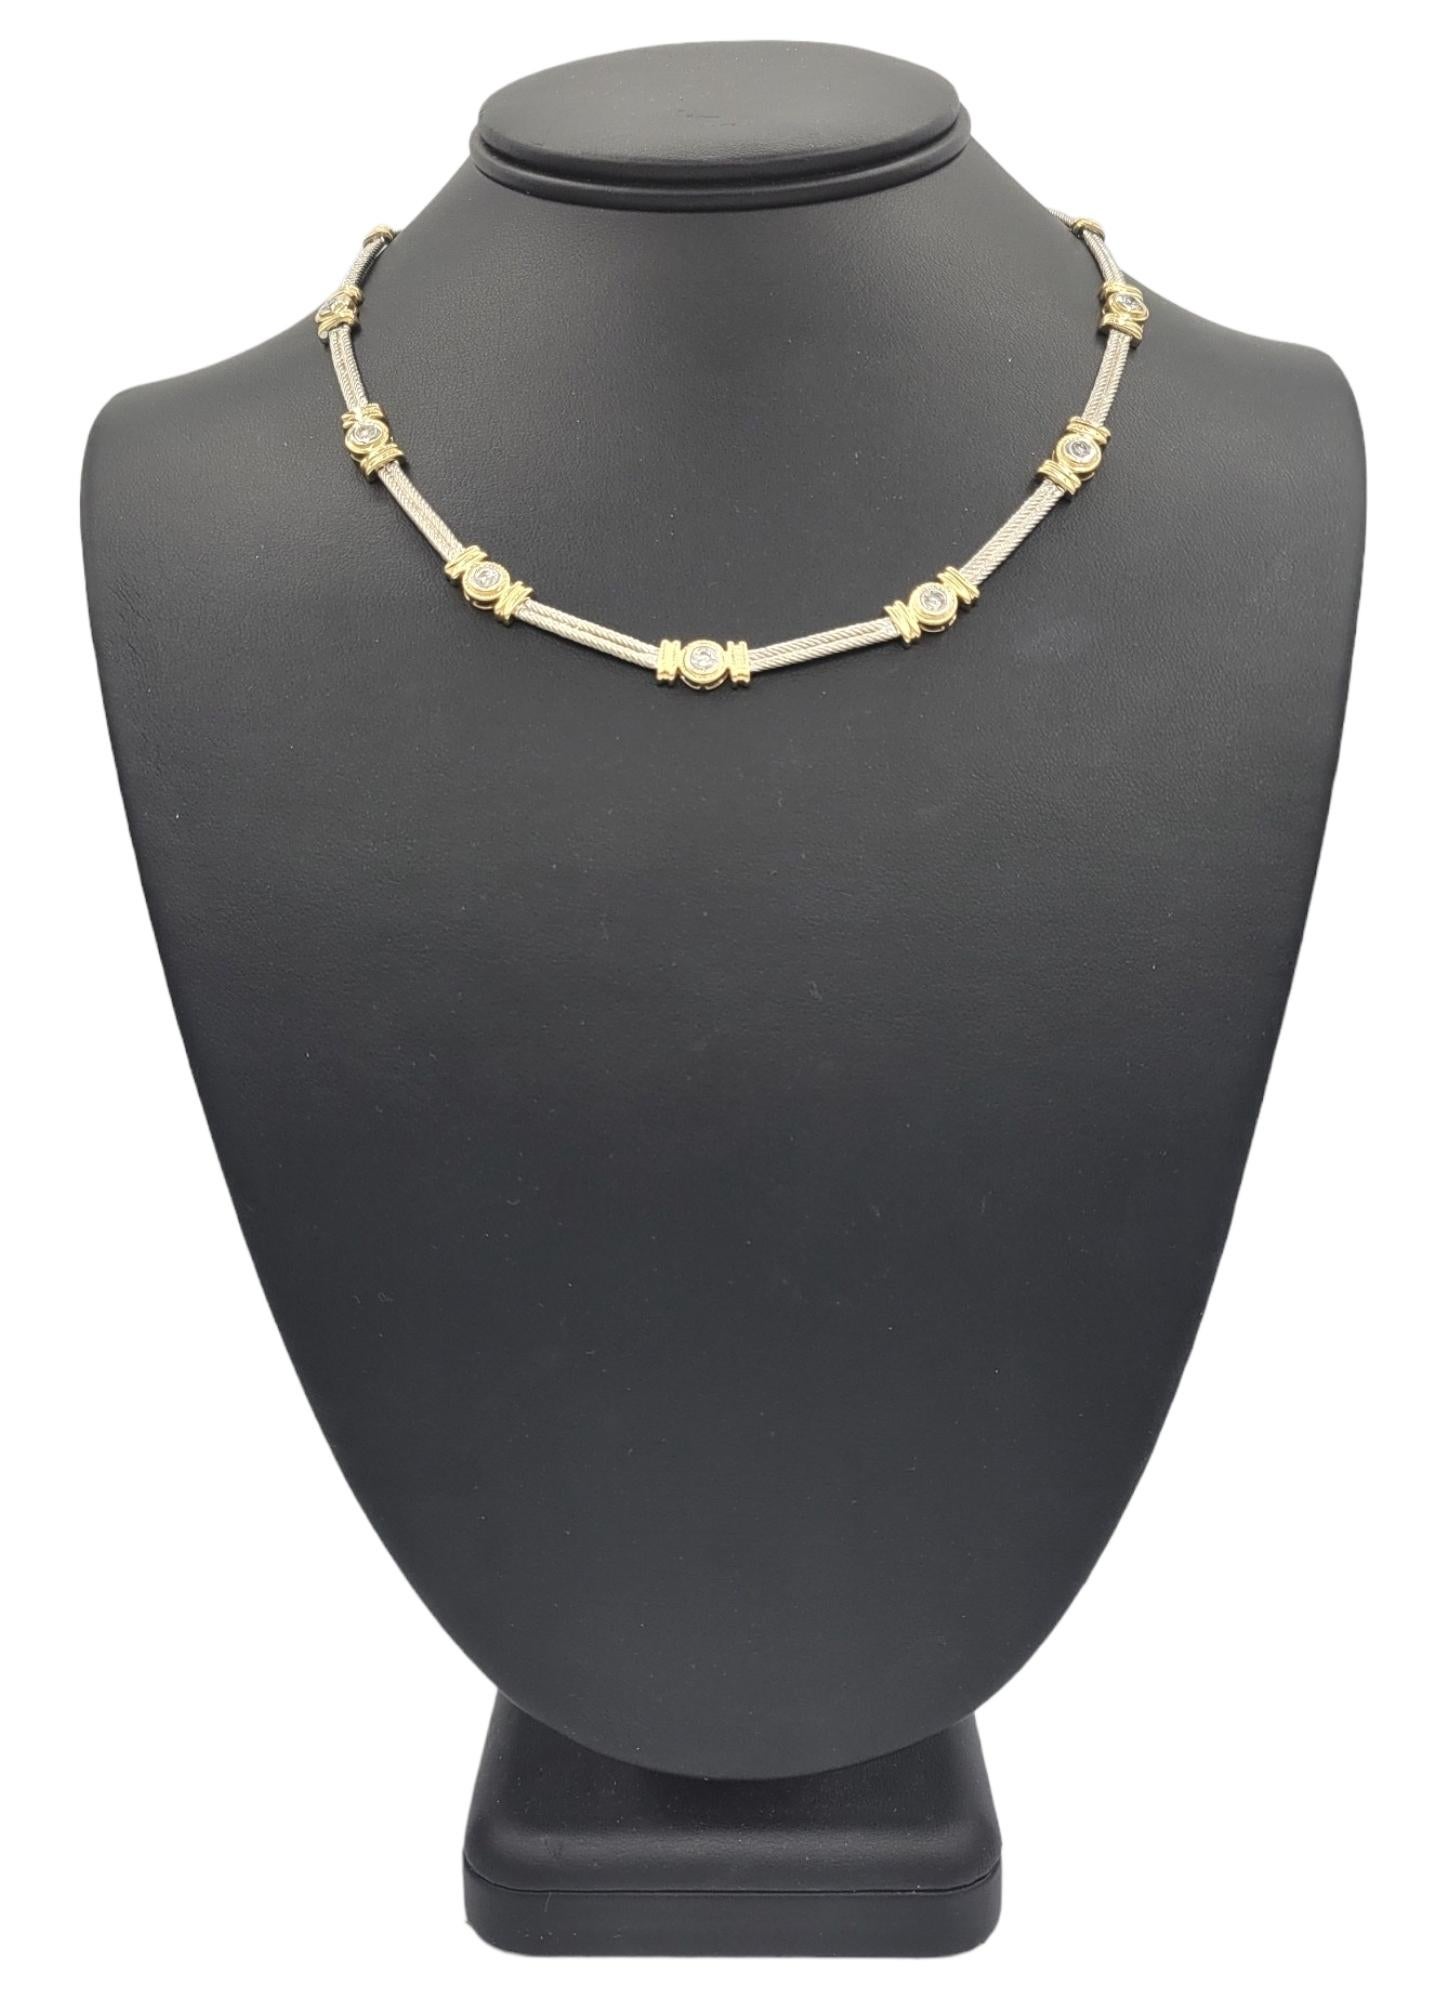 1.00 Carat Diamond Station Cable Link Necklace in 14 Karat White & Yellow Gold In Good Condition For Sale In Scottsdale, AZ